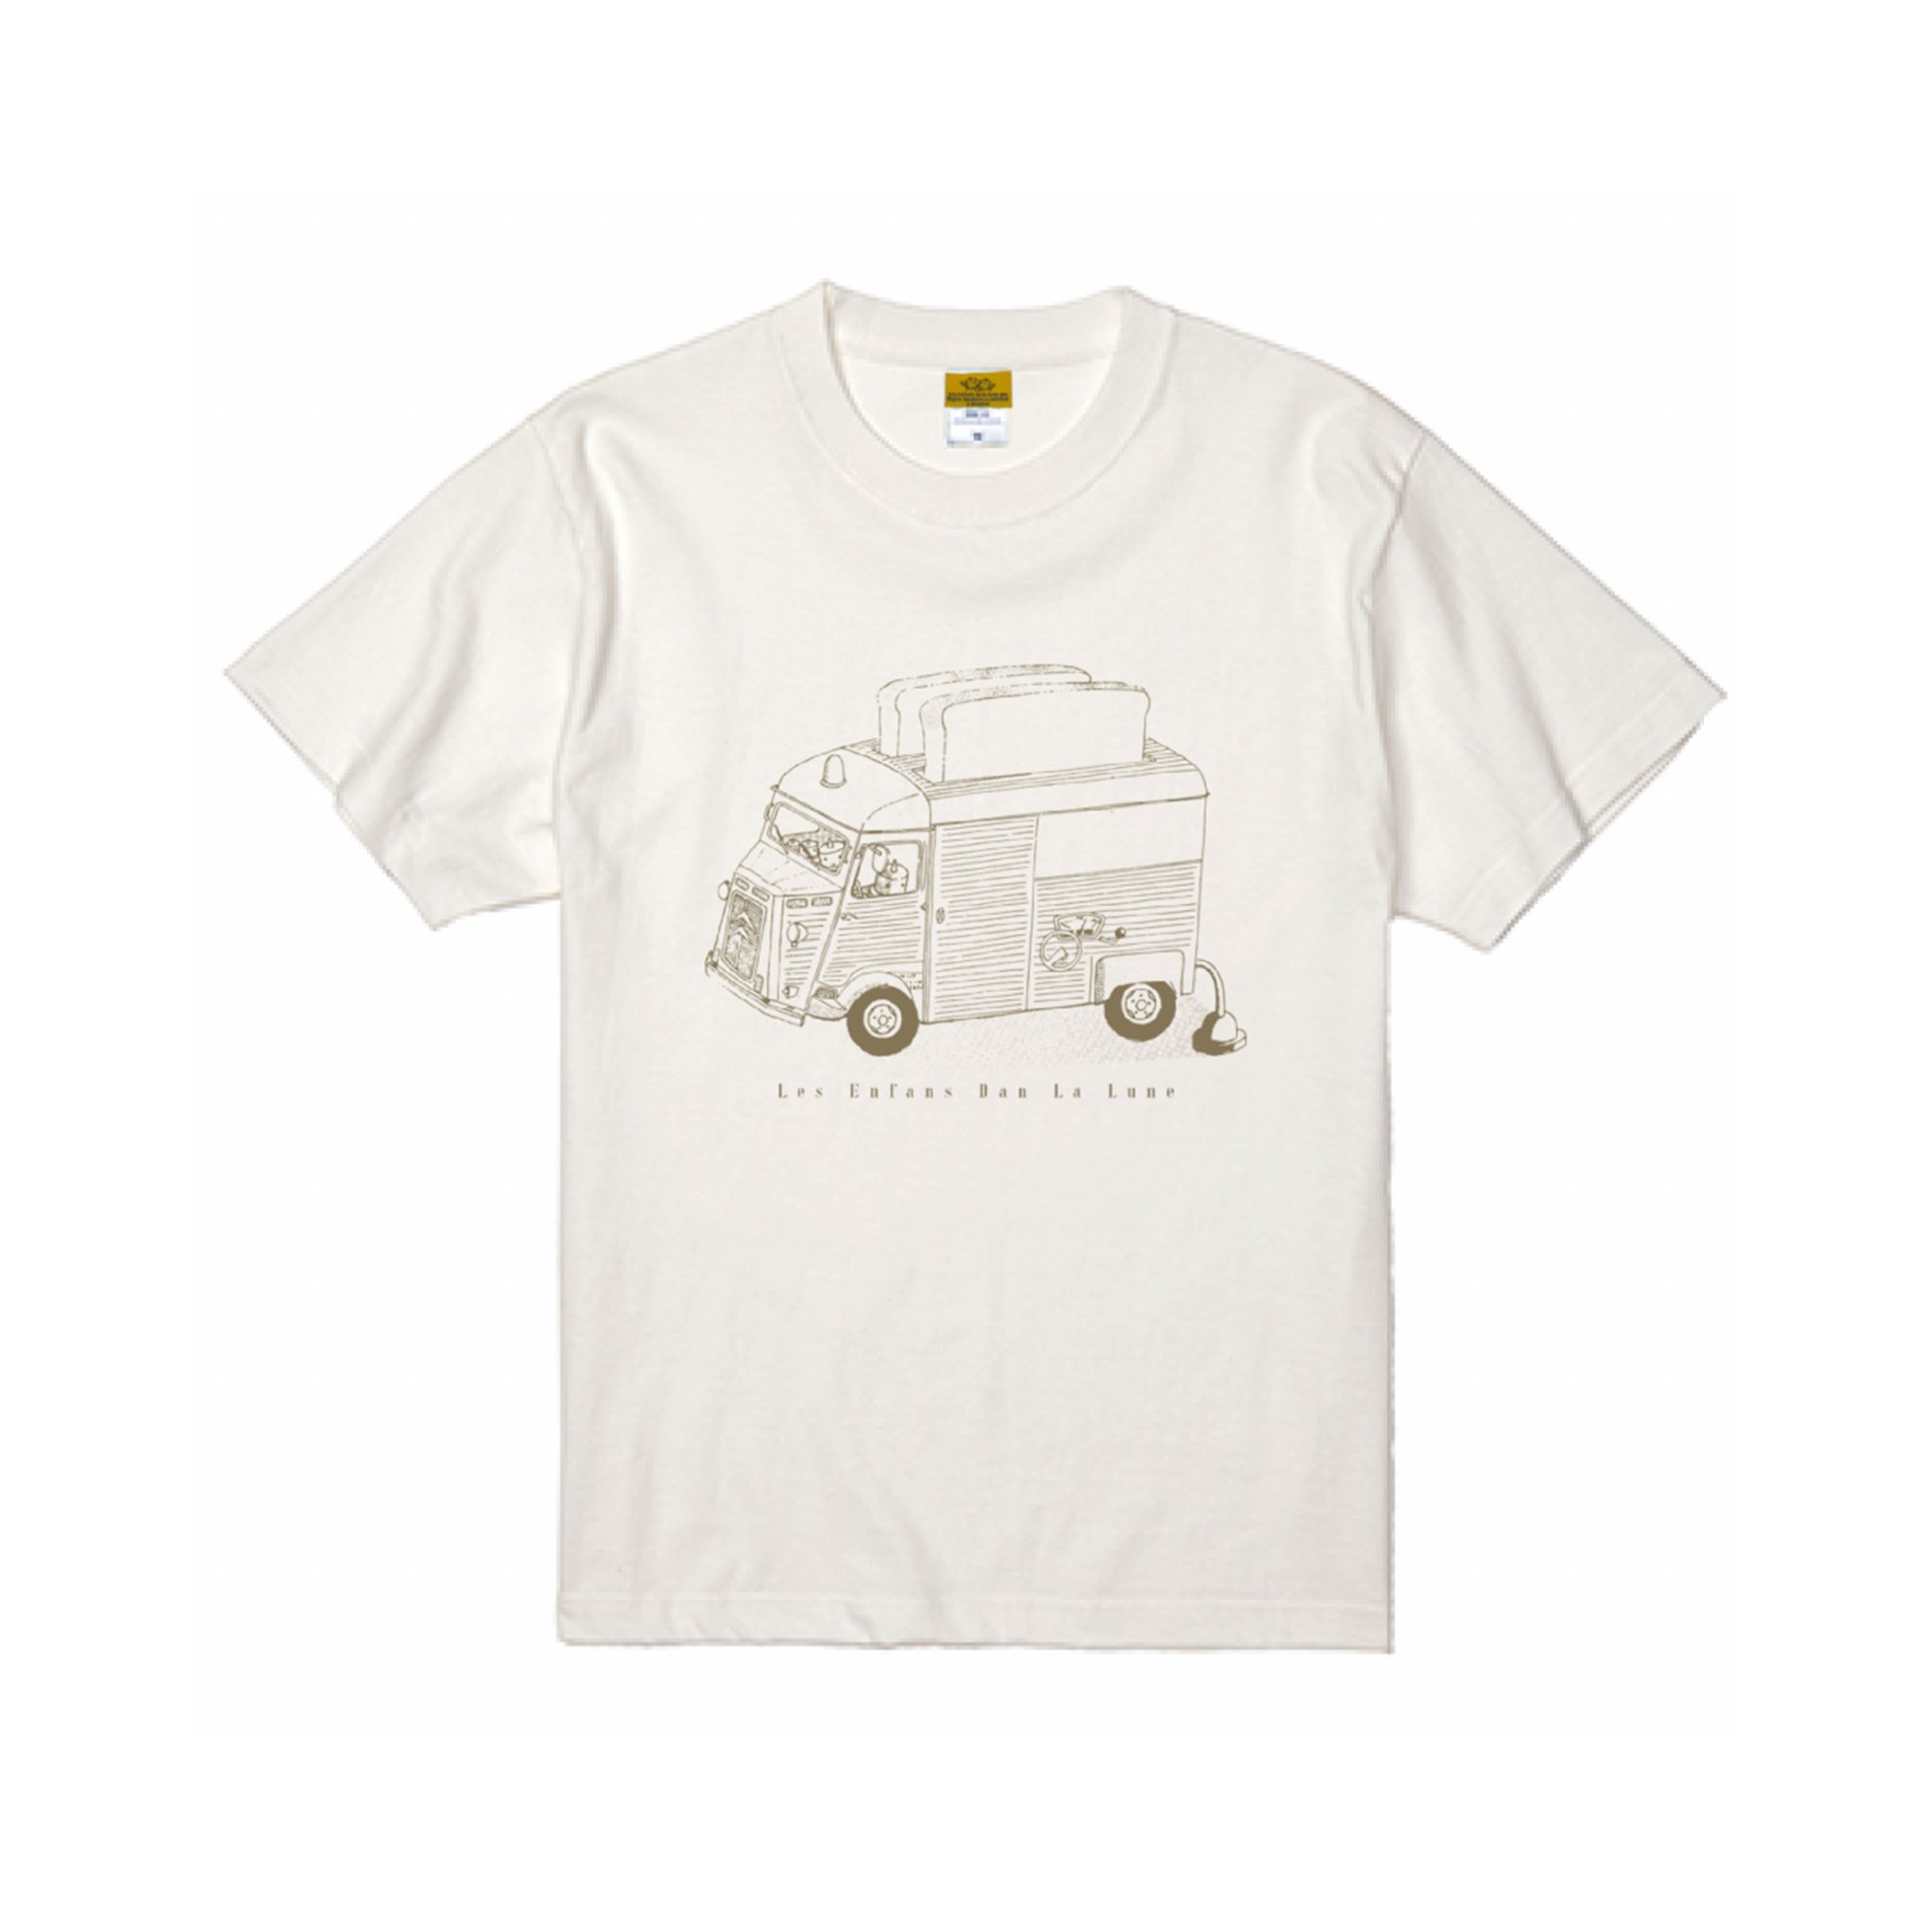 <img class='new_mark_img1' src='https://img.shop-pro.jp/img/new/icons1.gif' style='border:none;display:inline;margin:0px;padding:0px;width:auto;' />H-VAN Toaster   T-Shirts